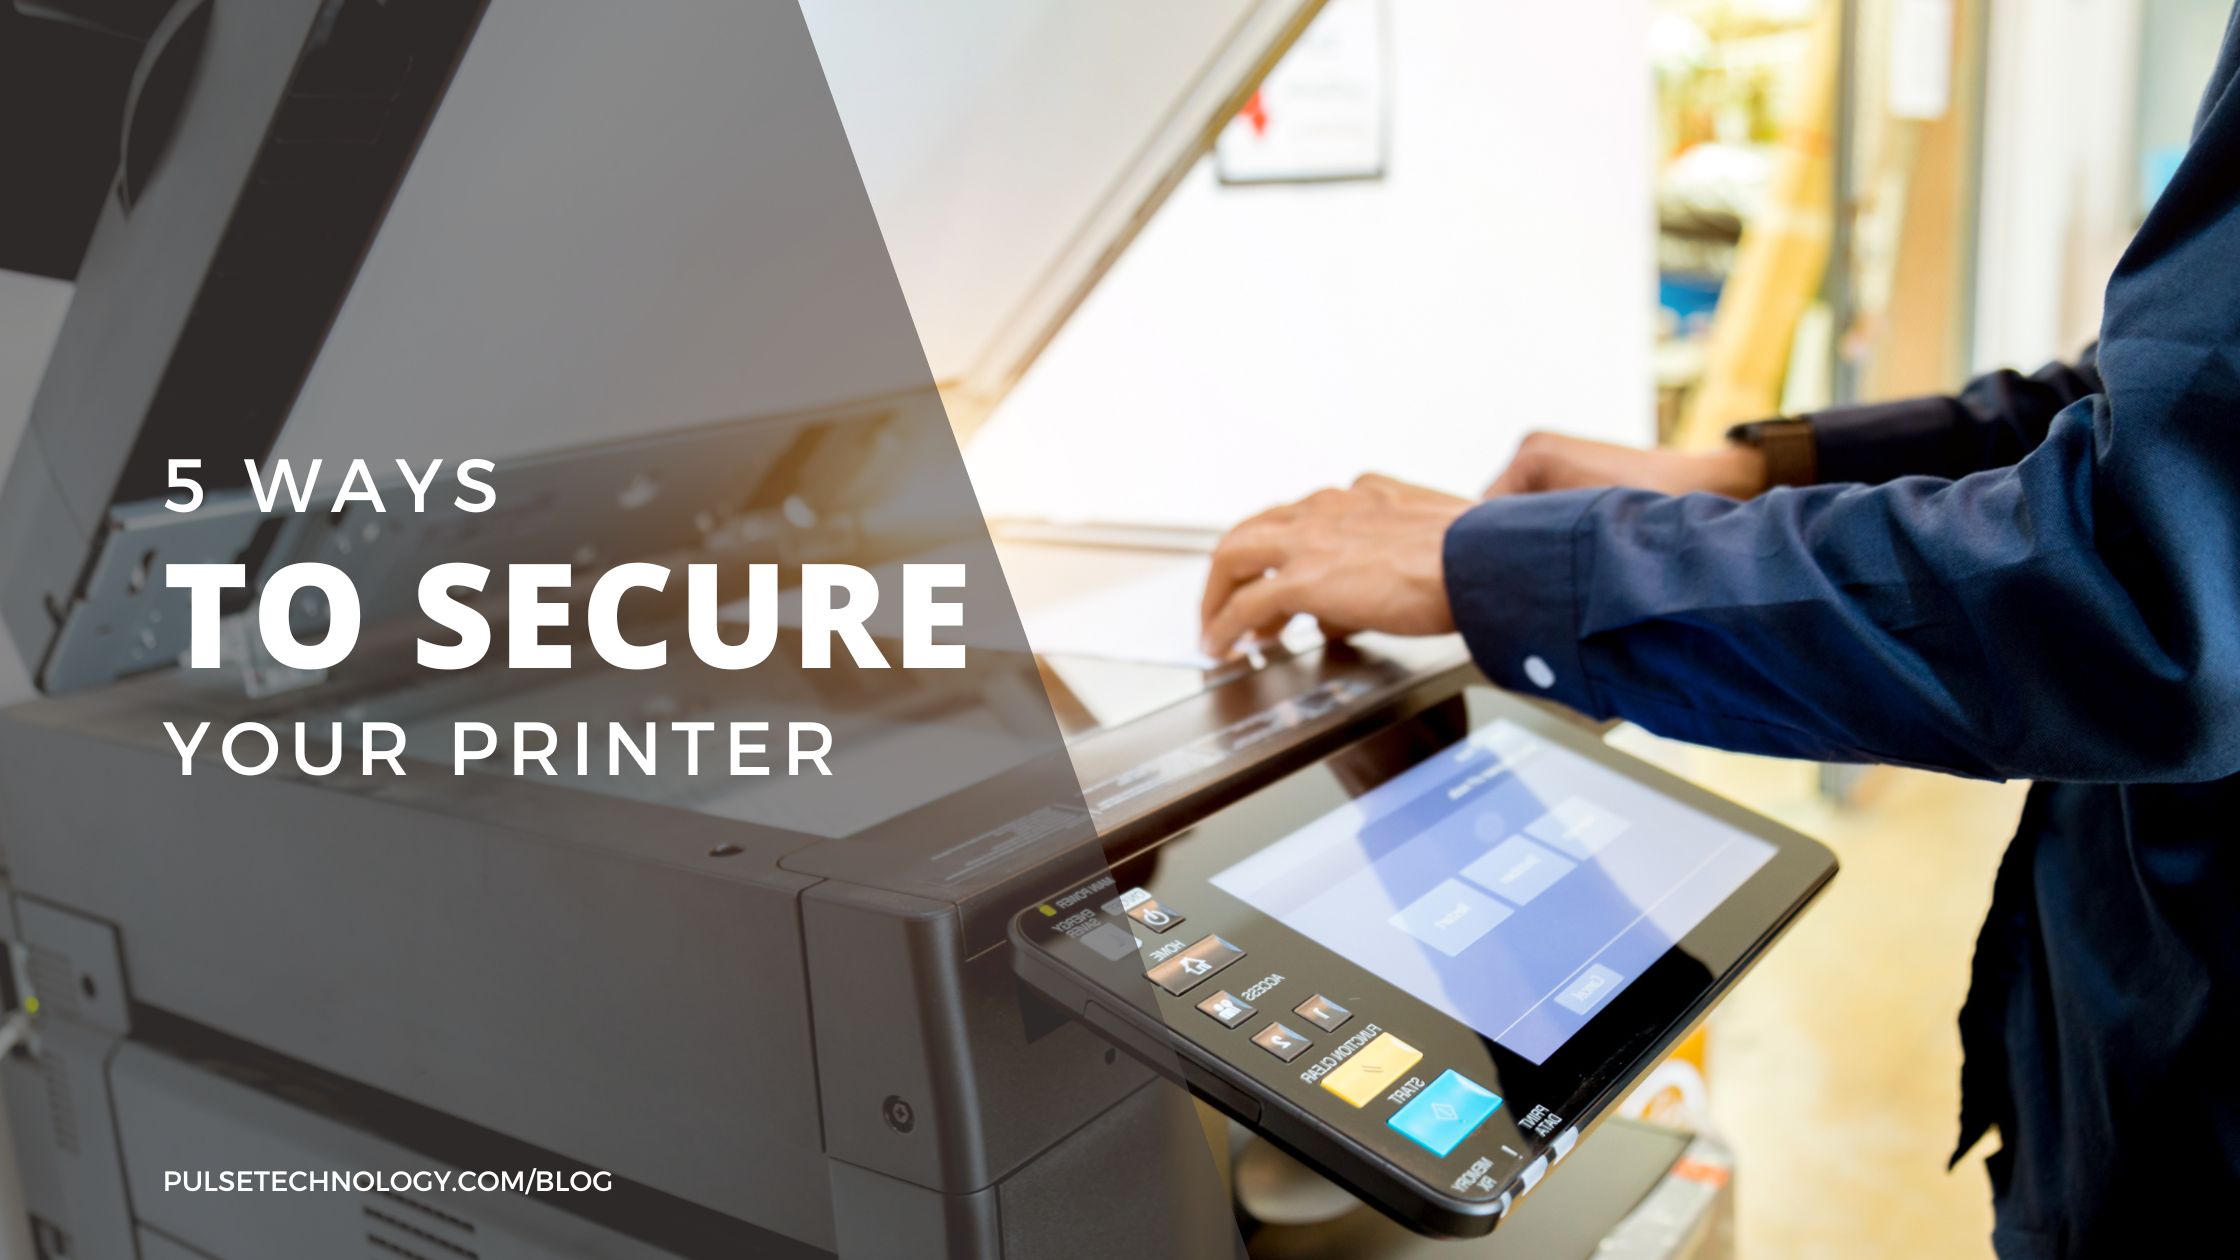 5 Ways to Secure your Printer